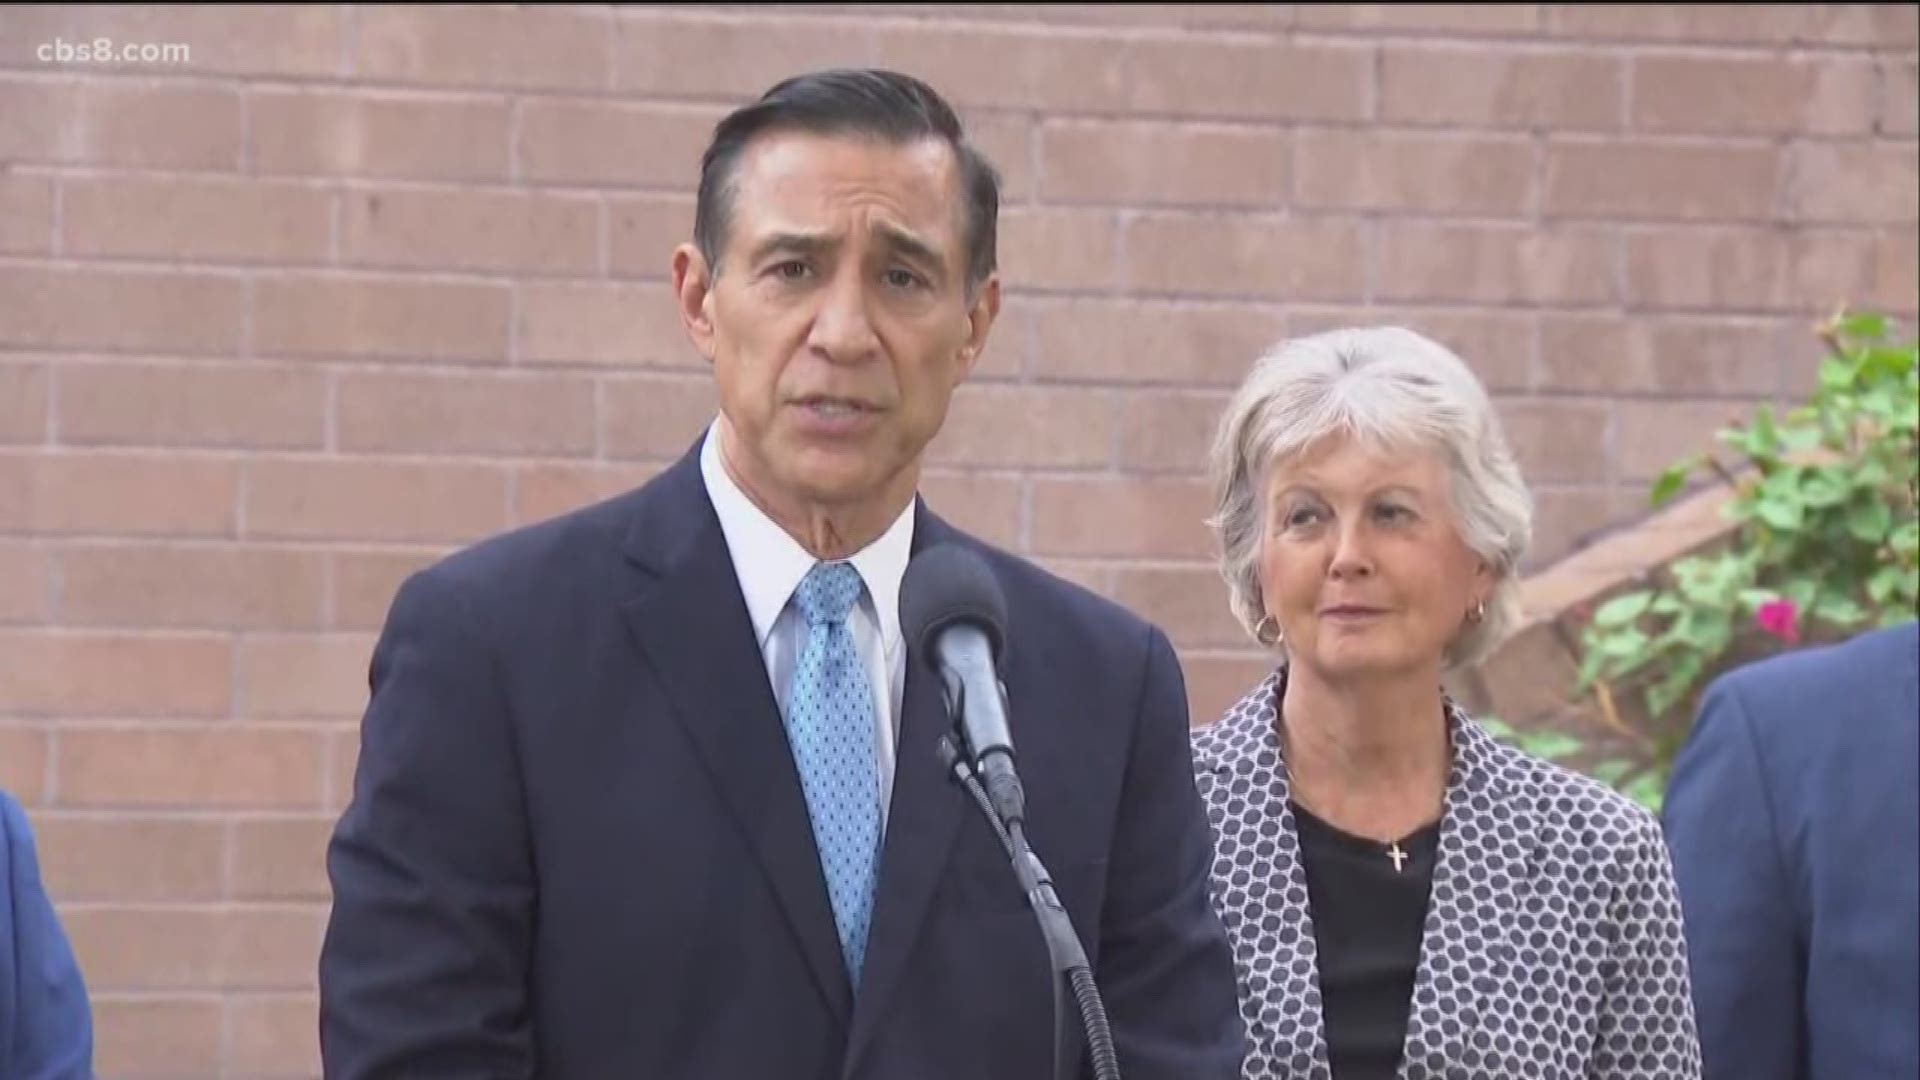 Issa joins an already crowded race trying to become the next District 50 Congressman.